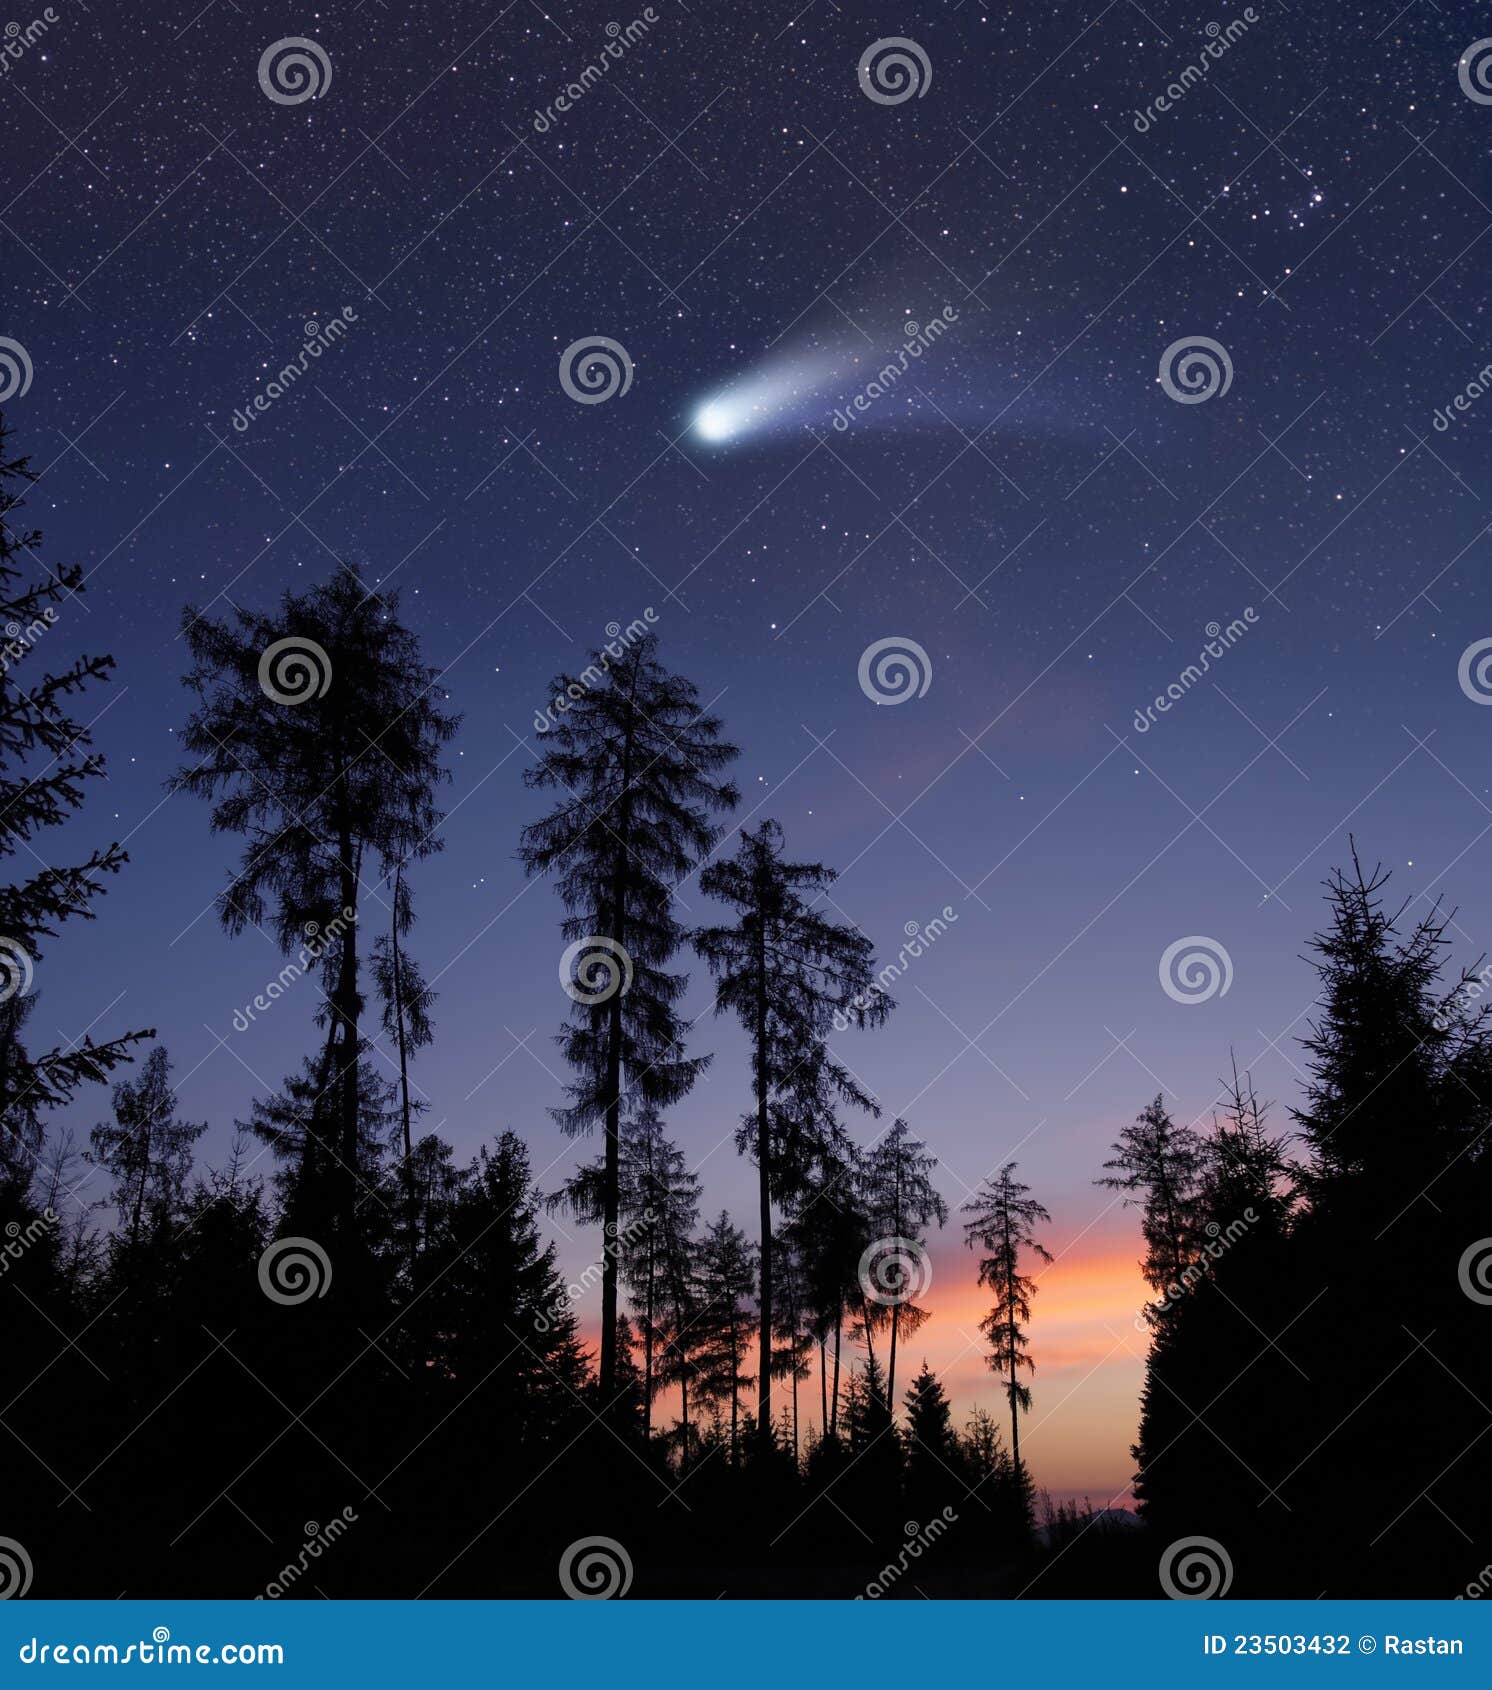 a comet in the evening sky